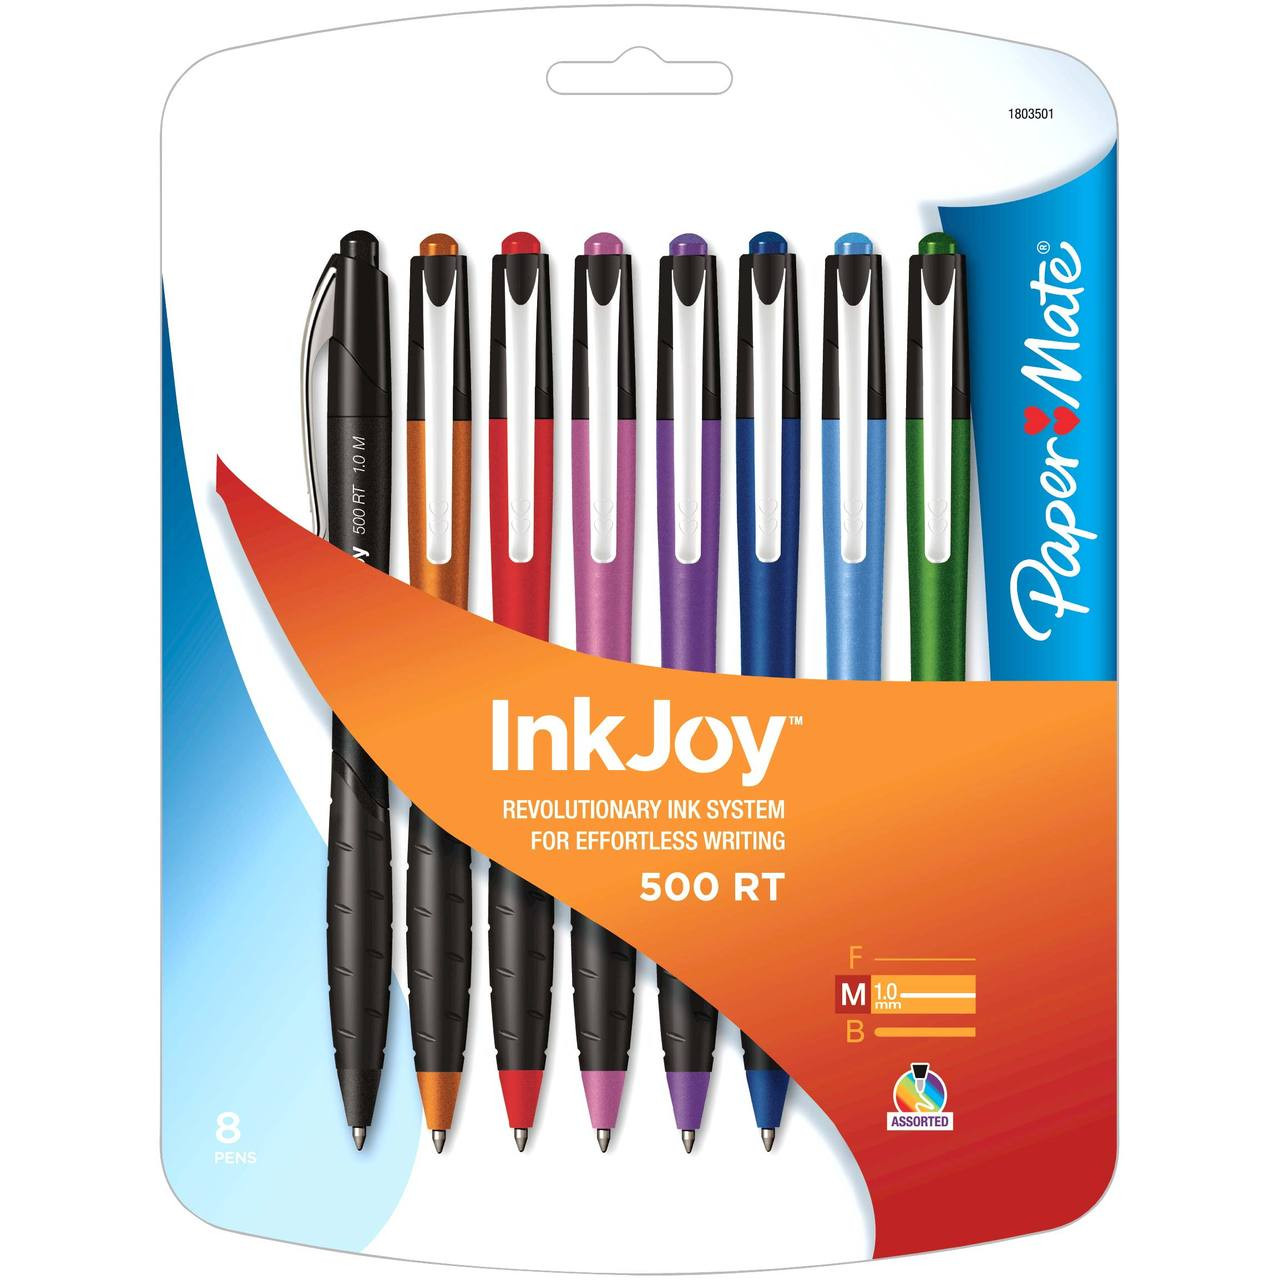 InkJoy Multi-Color Fashion Ballpoint Pens, 8-Pack